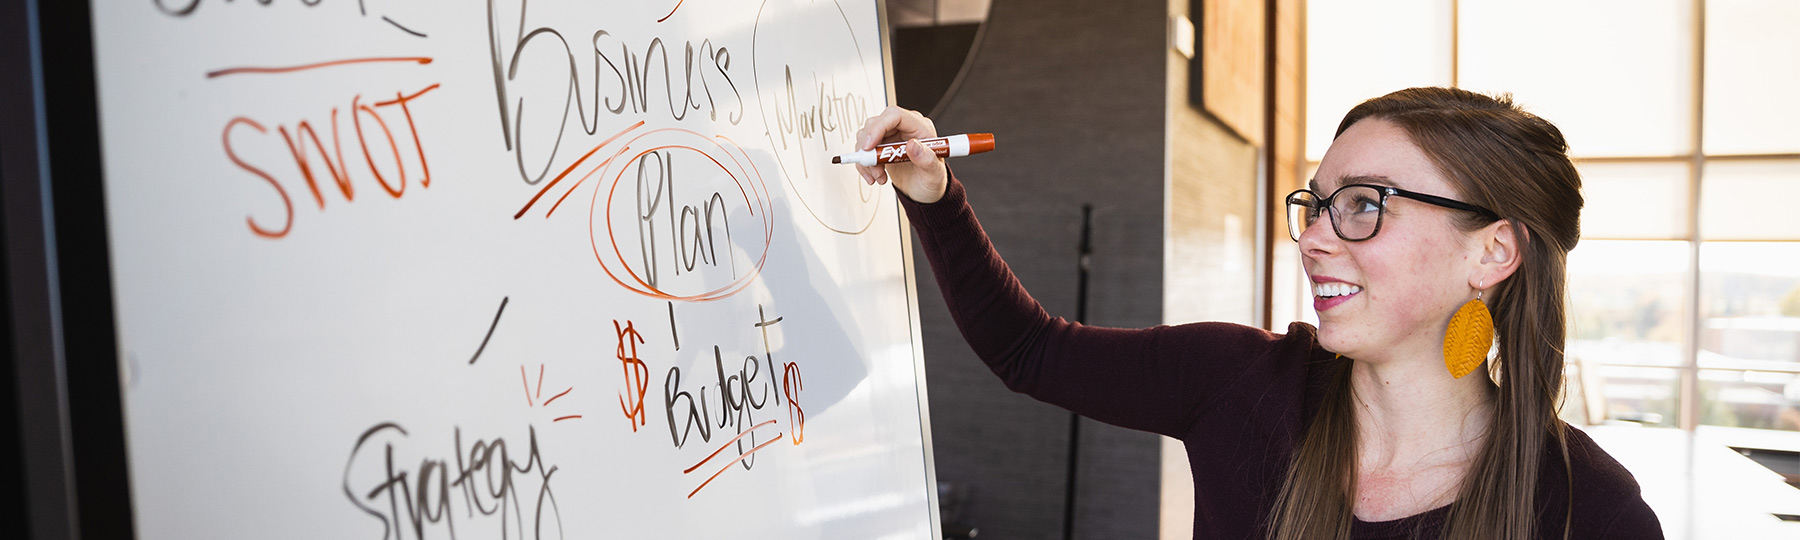 Female Master of Business Administration graduate student working on a white board.